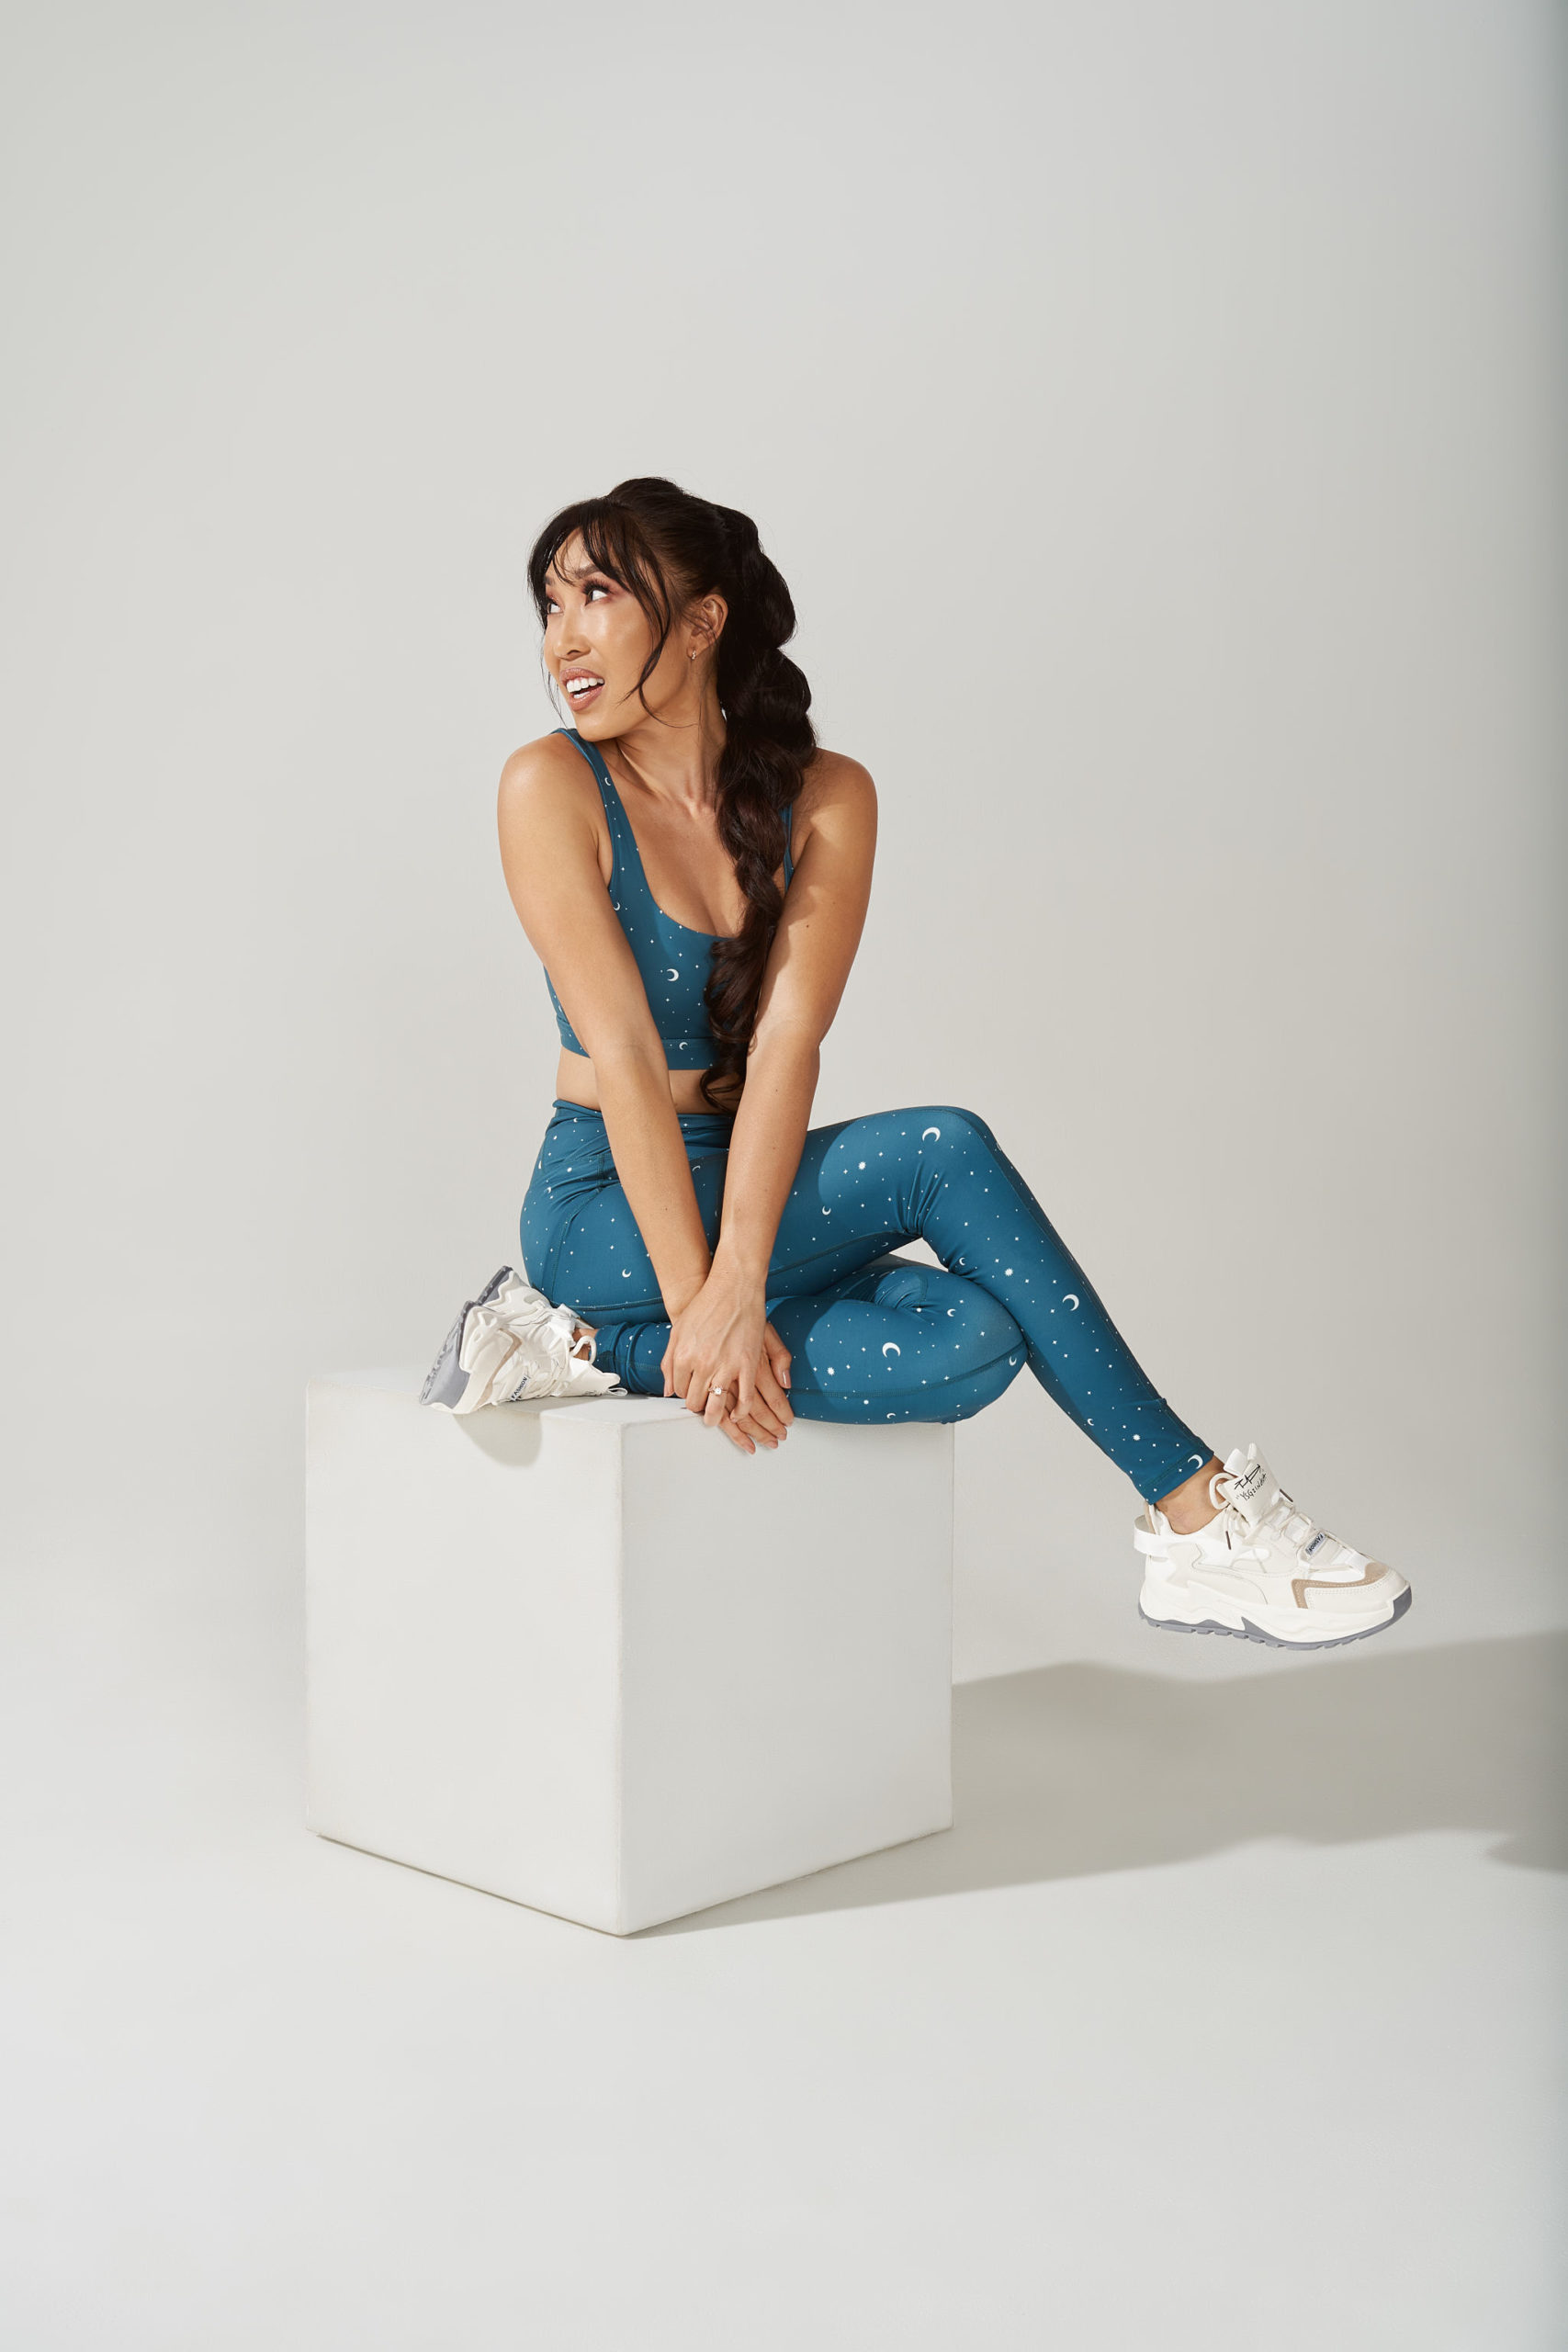 Get Lost In The Magic Of My New Mystical Moments Collection - Blogilates